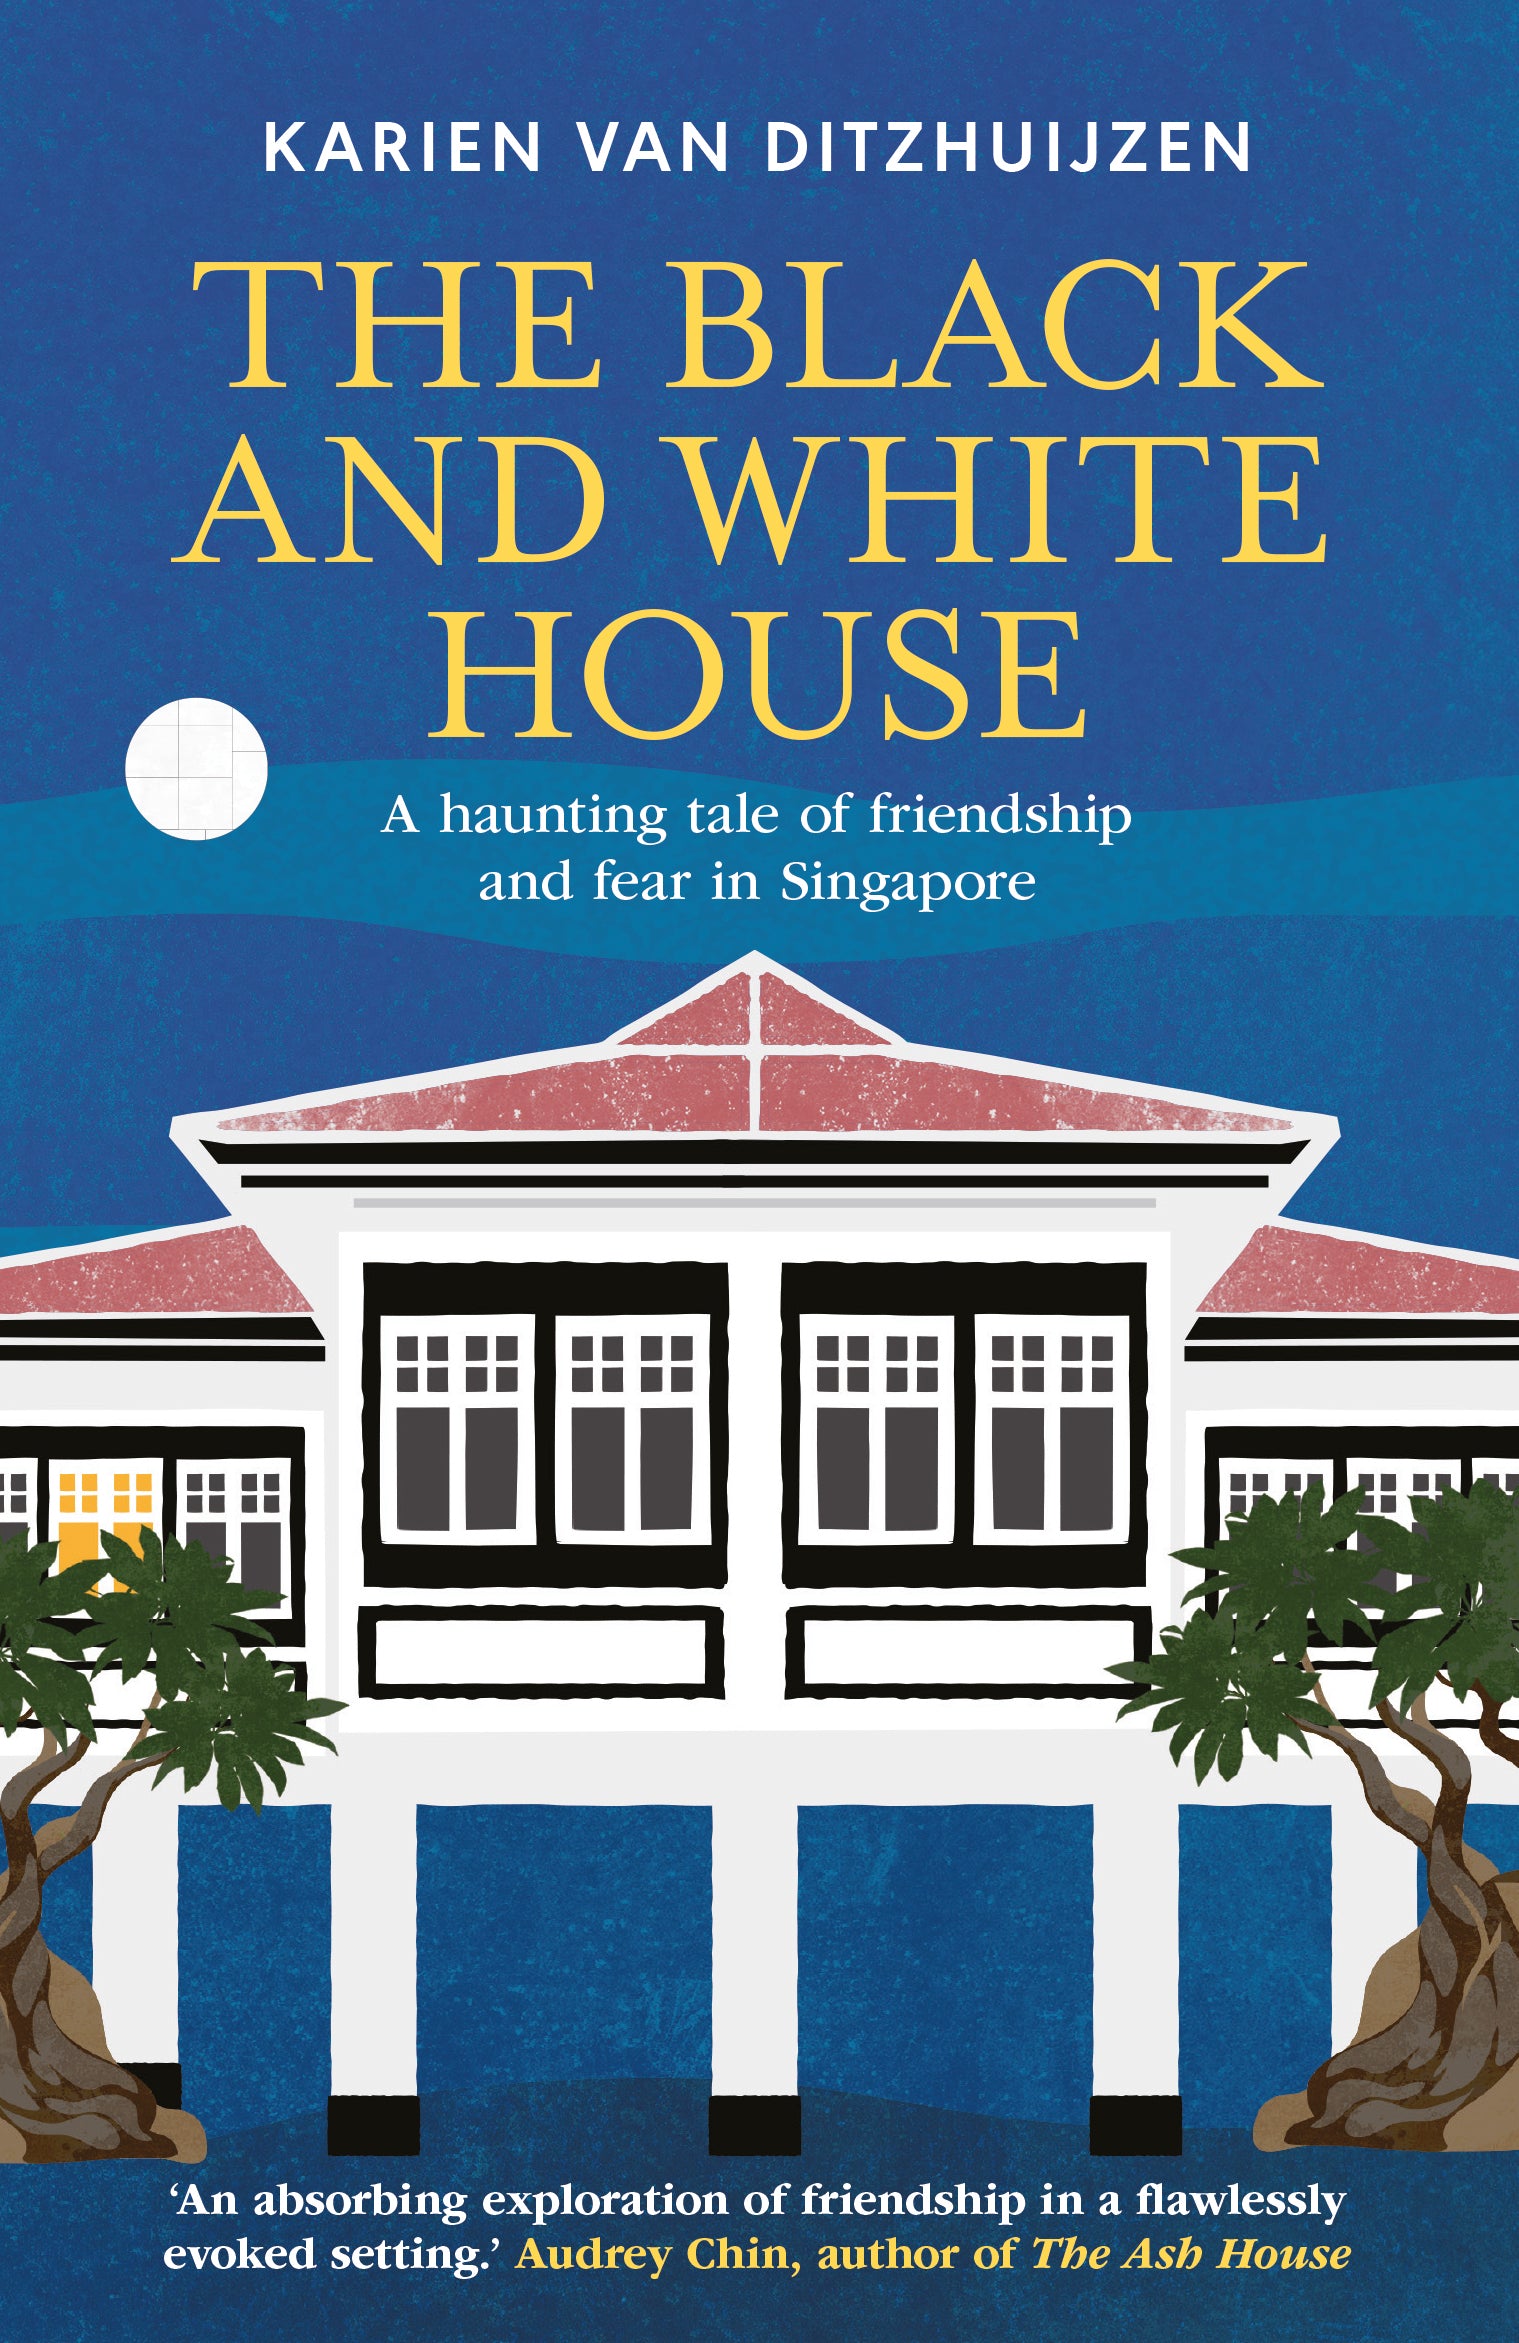 The Black and White House: A haunting tale of friendship and fear in Singapore